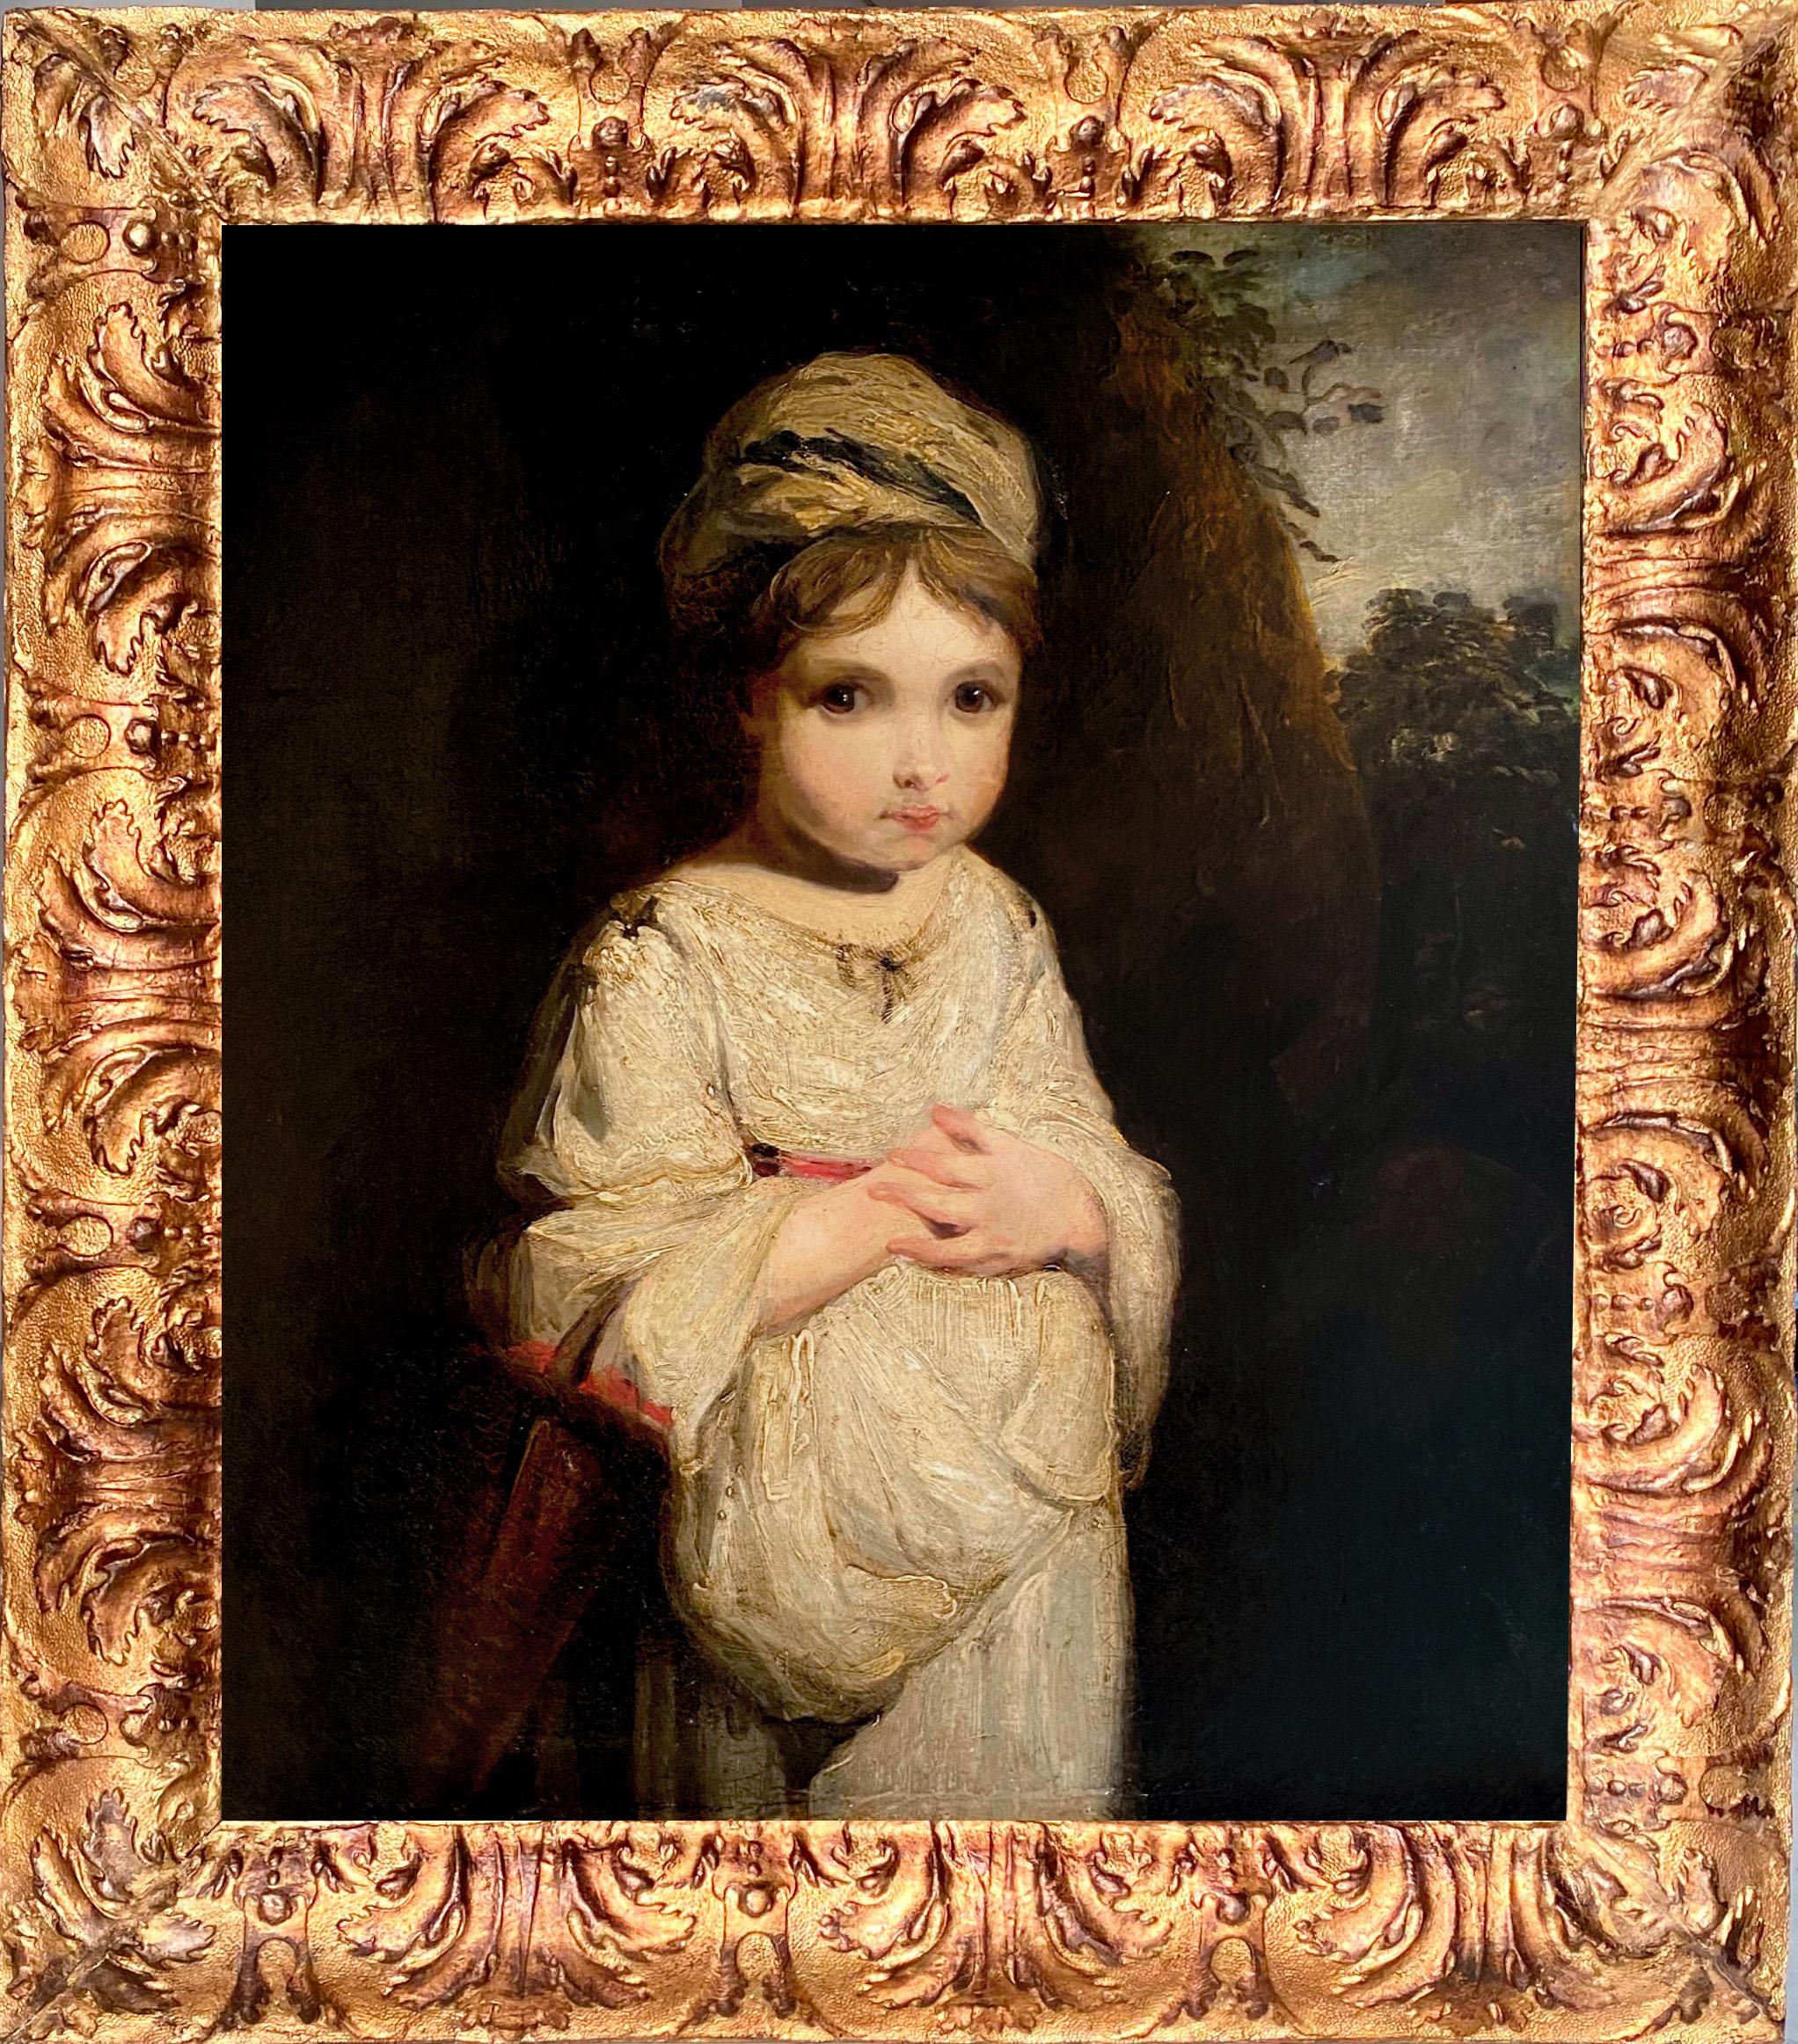 (Circle of) Joshua Reynolds Portrait Painting - 18th century British Old Master painting - The Cherry Girl - Age of innocence 